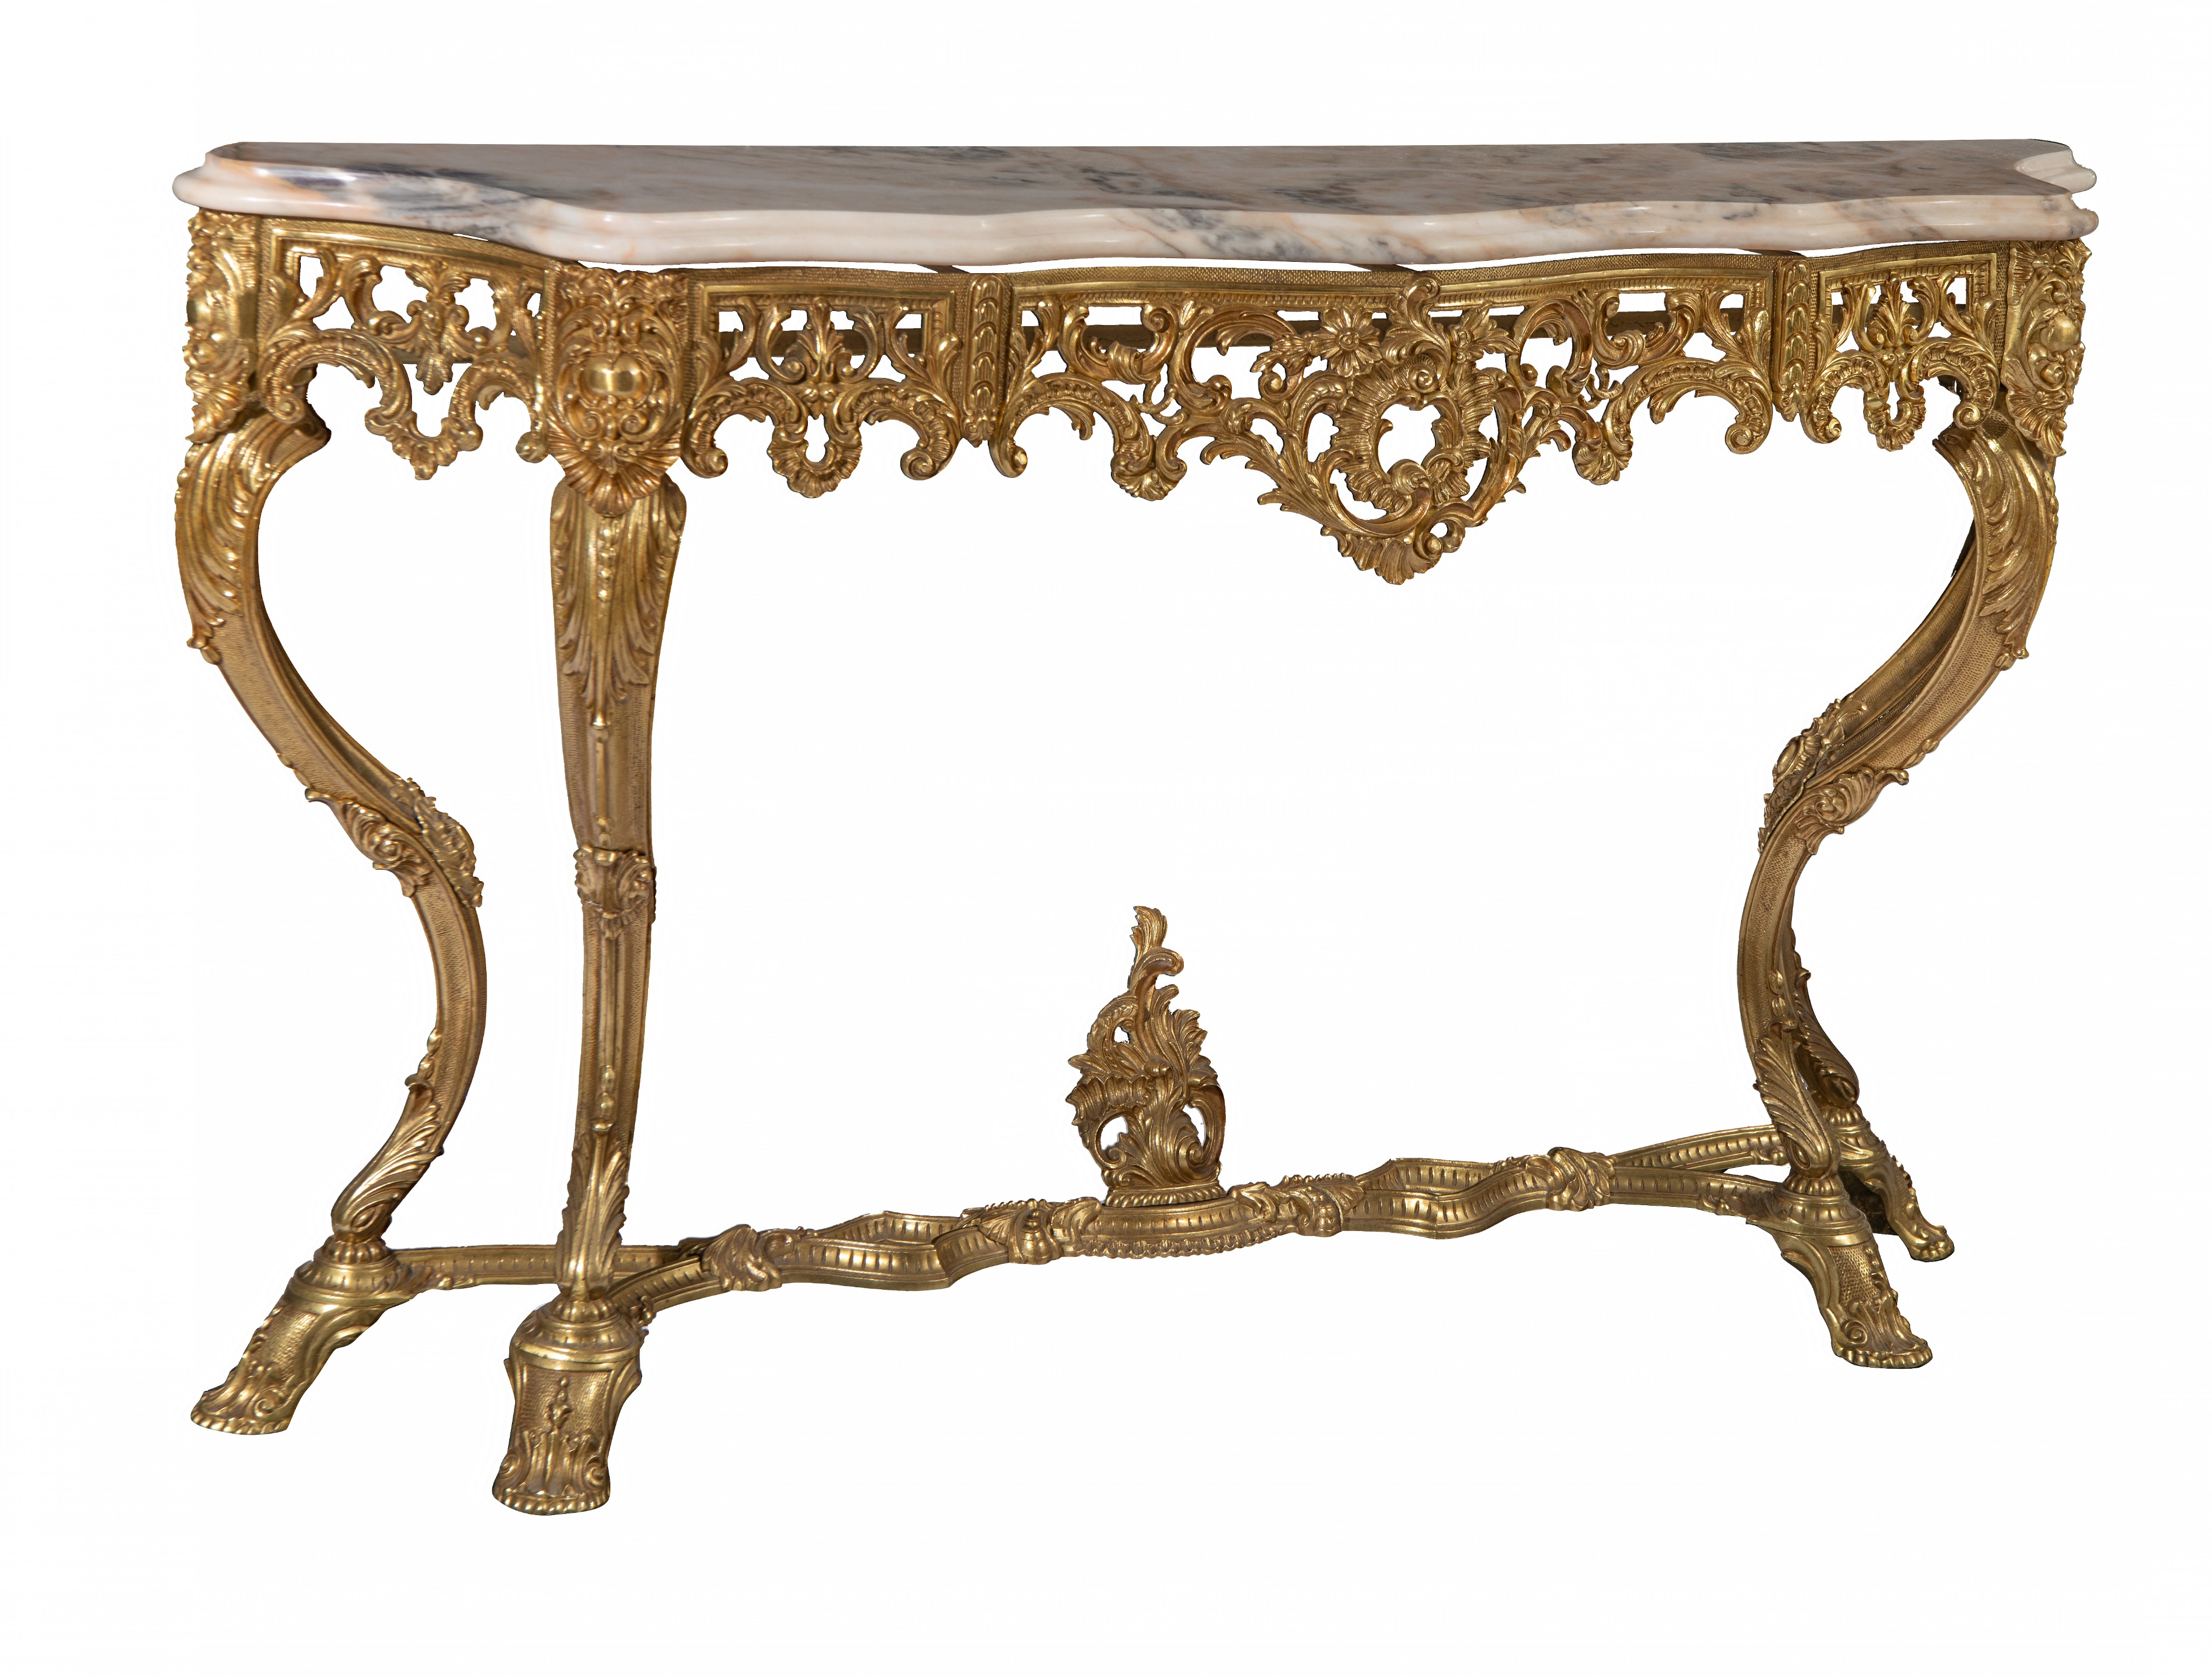 A large Rococo style gilt metal console table and mirror, H 125 - W 110 cm (the mirror) - H 85 - W 1 - Image 2 of 12